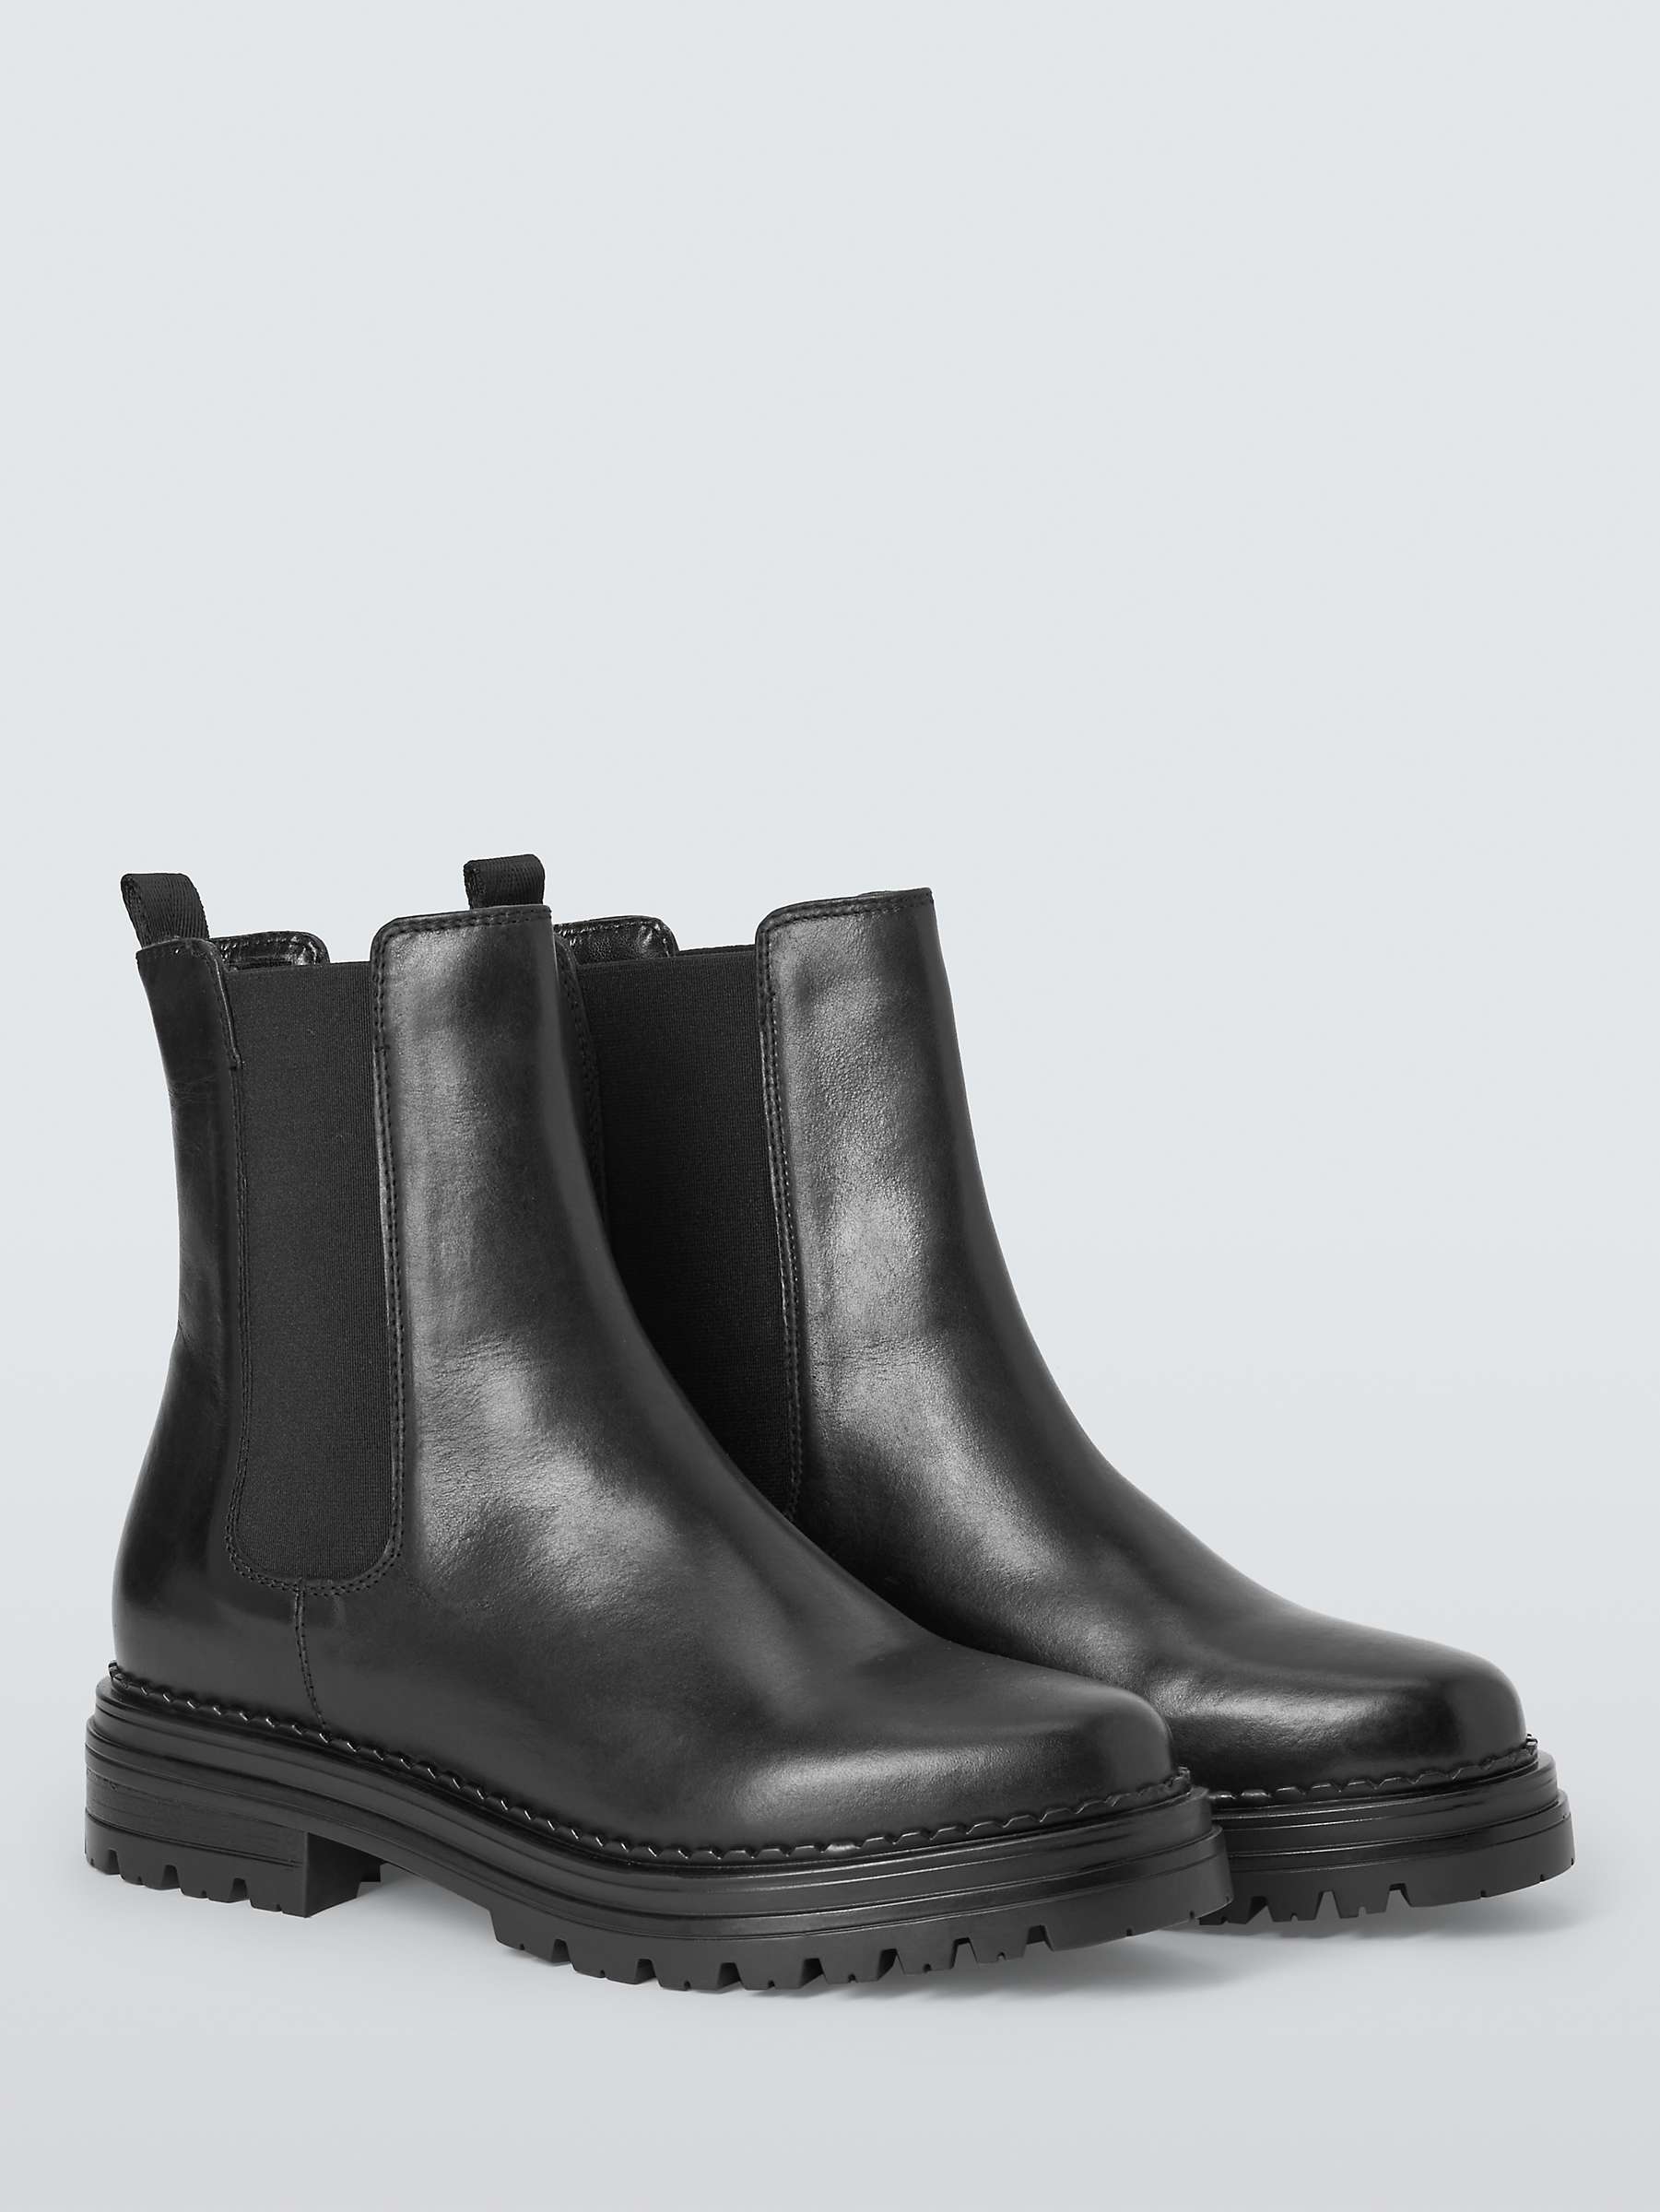 Buy John Lewis Poppie Leather Cleated Sole High Cut Chelsea Boots, Black Online at johnlewis.com